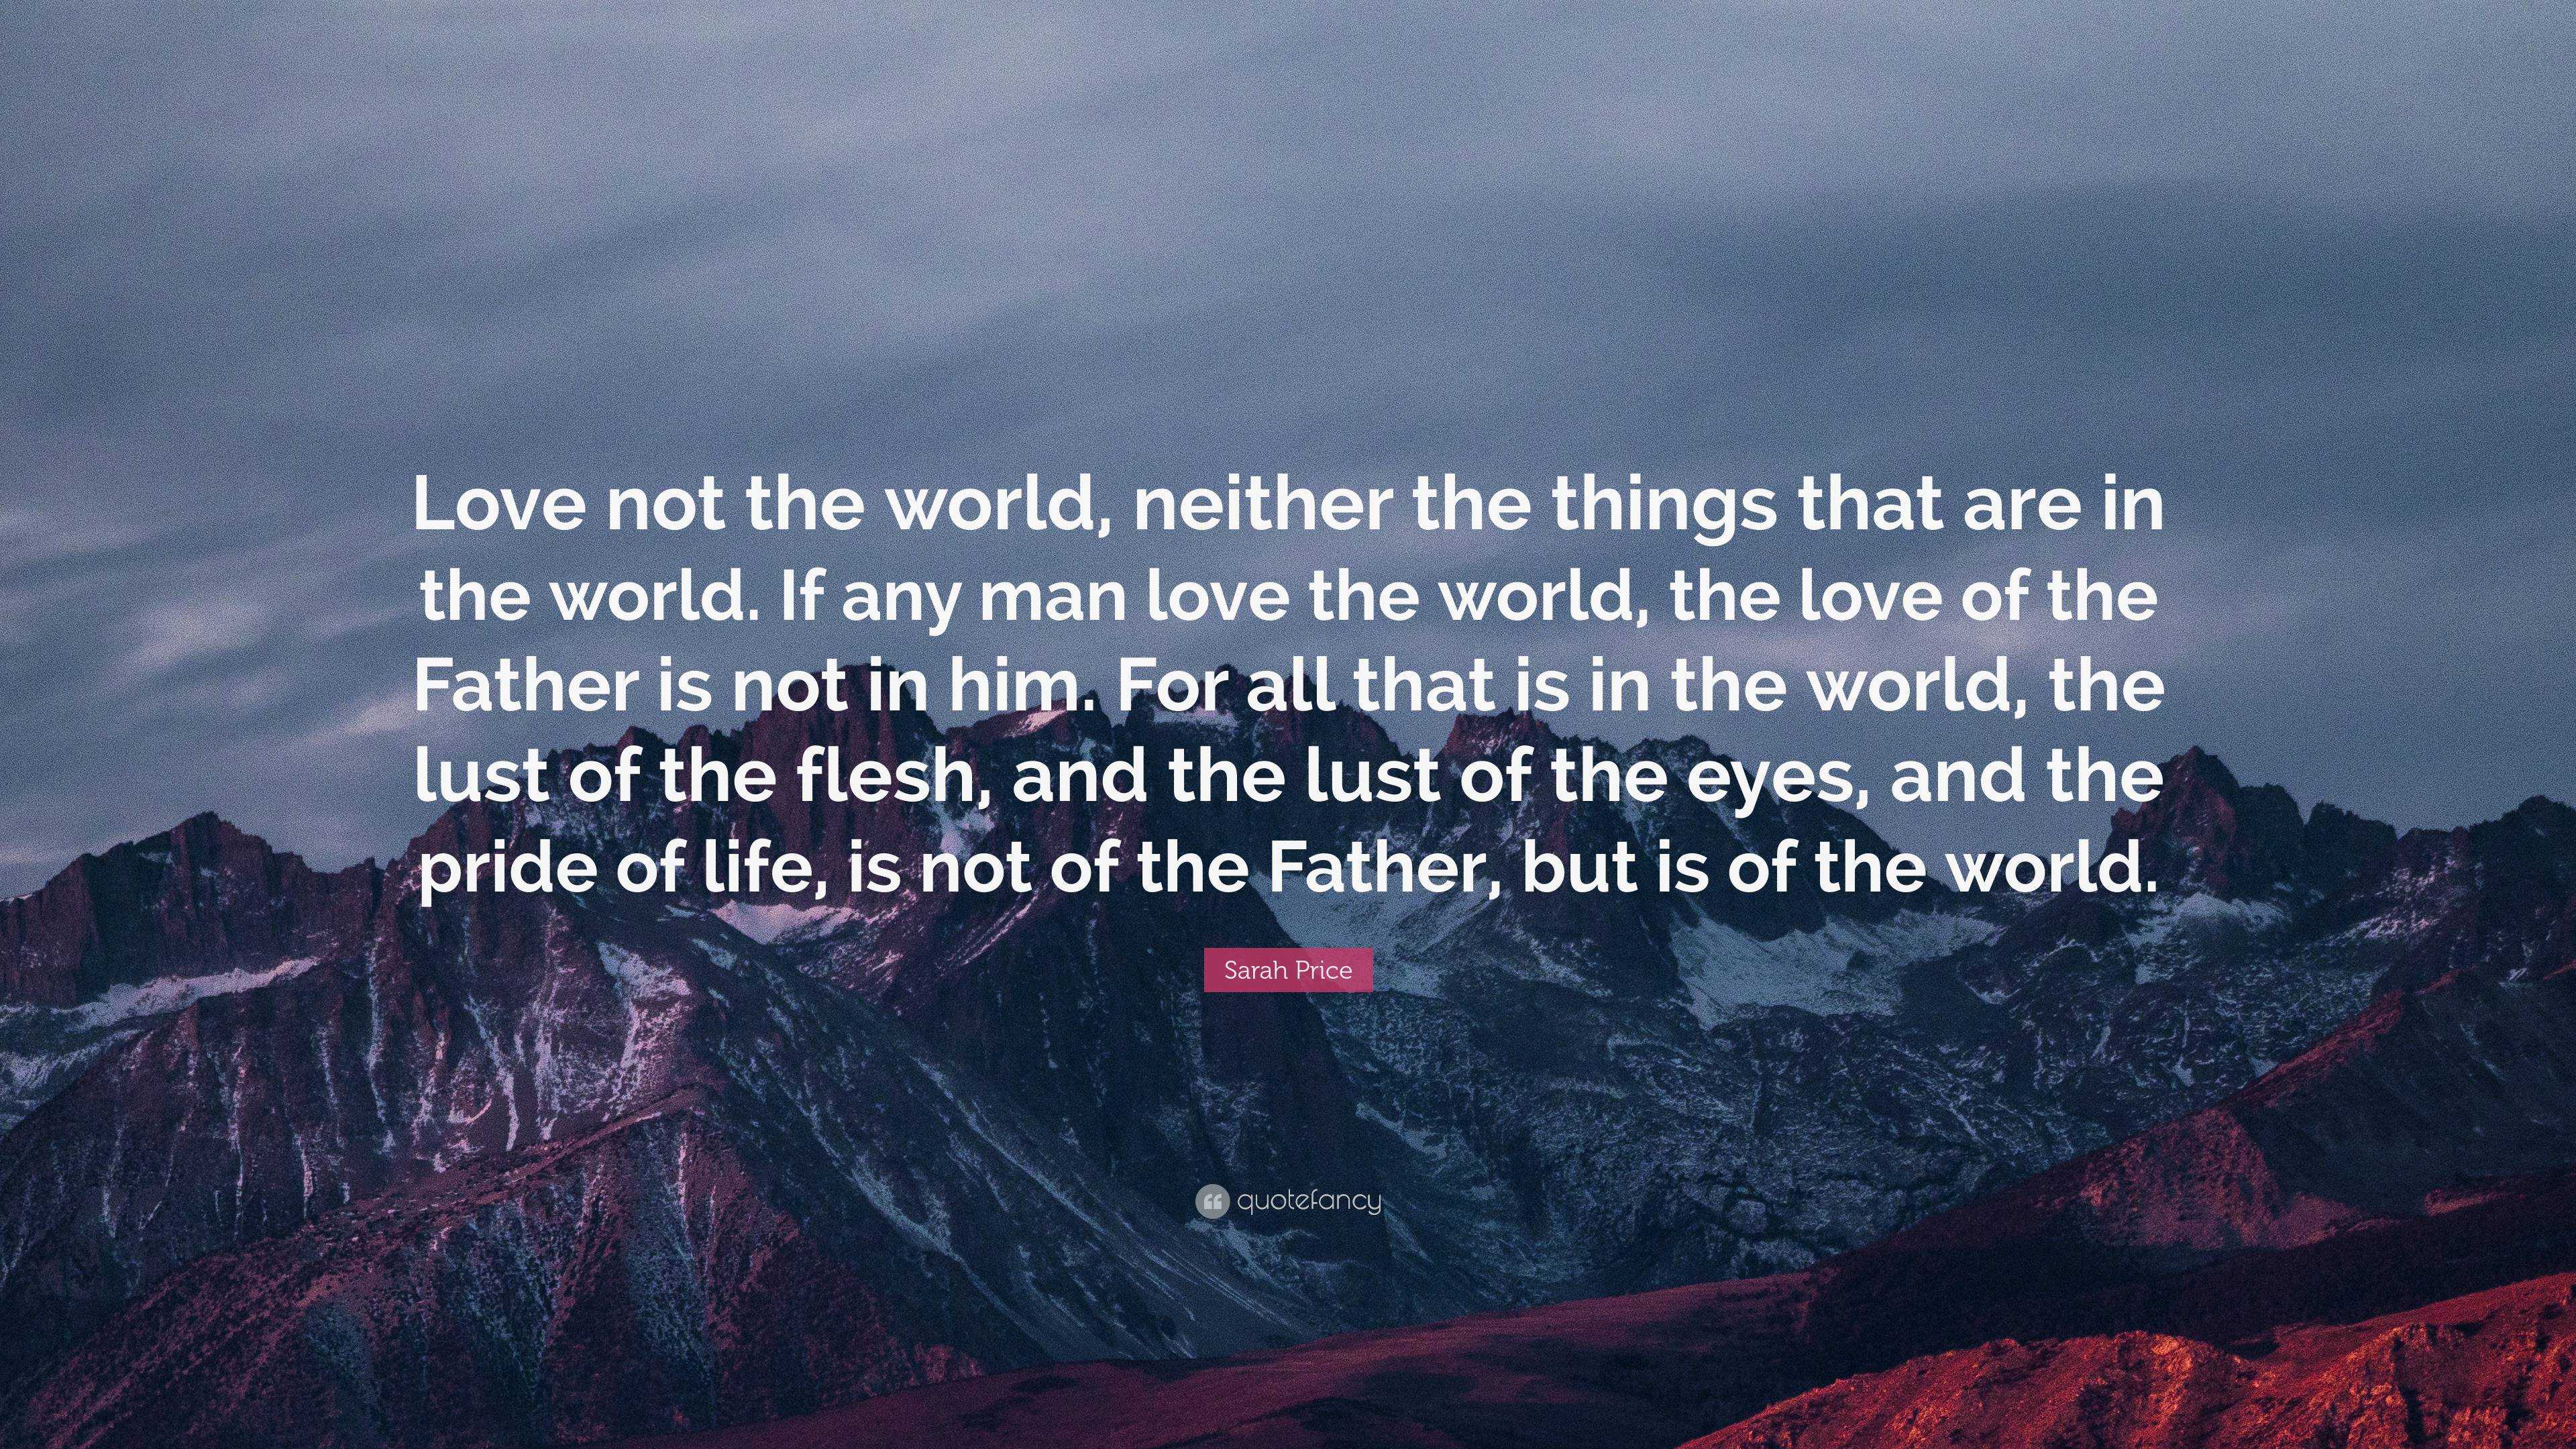 Sarah Price Quote: “Love not the world, neither the things that are in ...